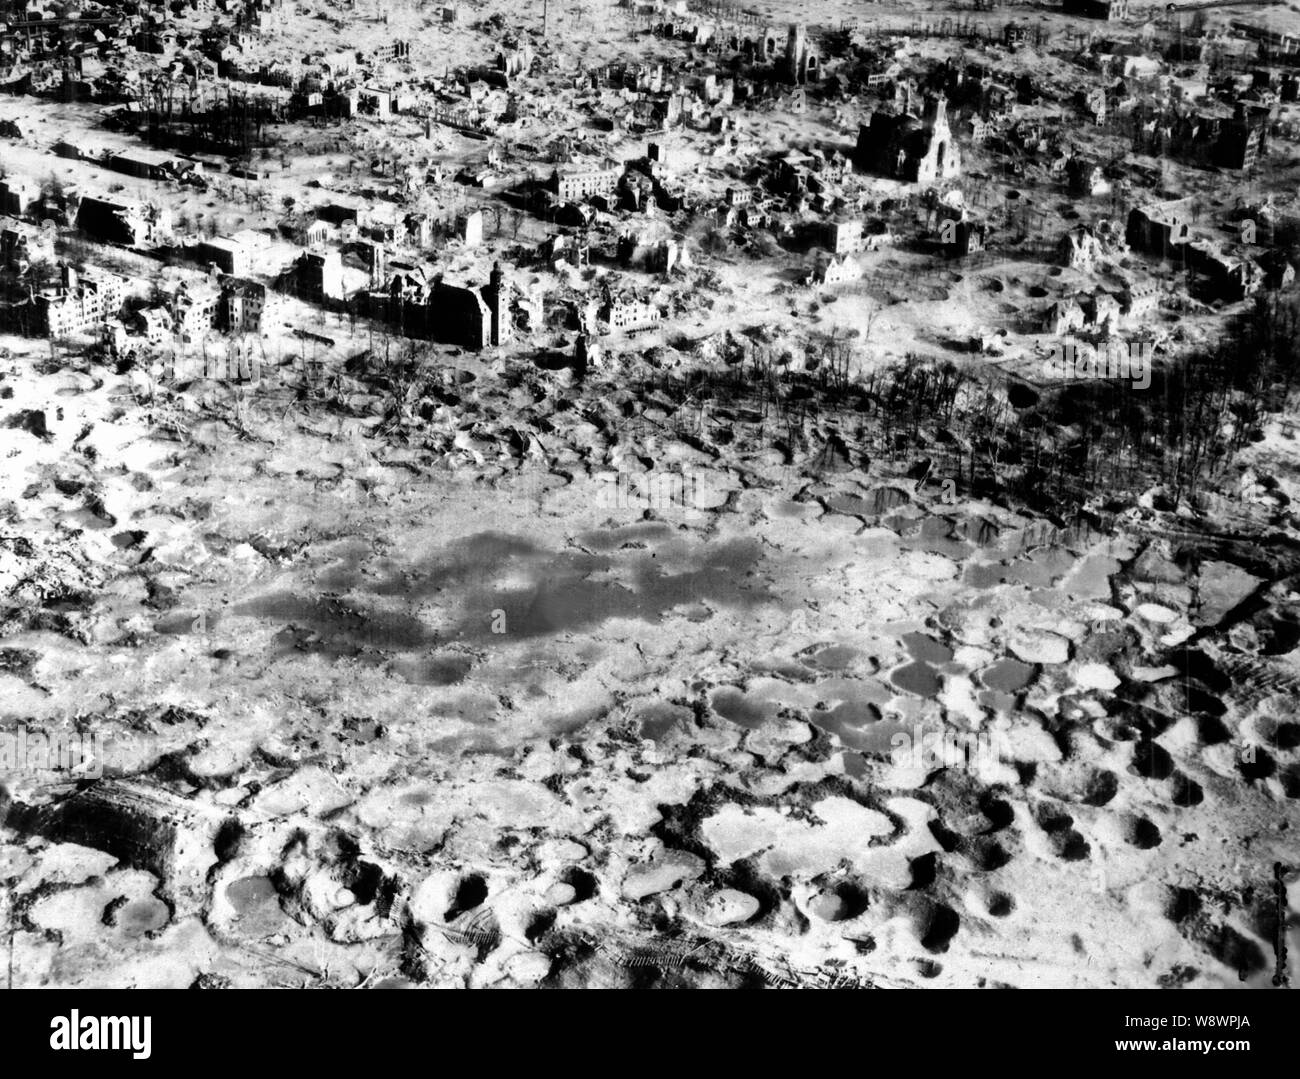 The city of Wesel, devastated by Allied bombing in preparation for the crossing of the Rhine on 22-23 March 1945. Stock Photo